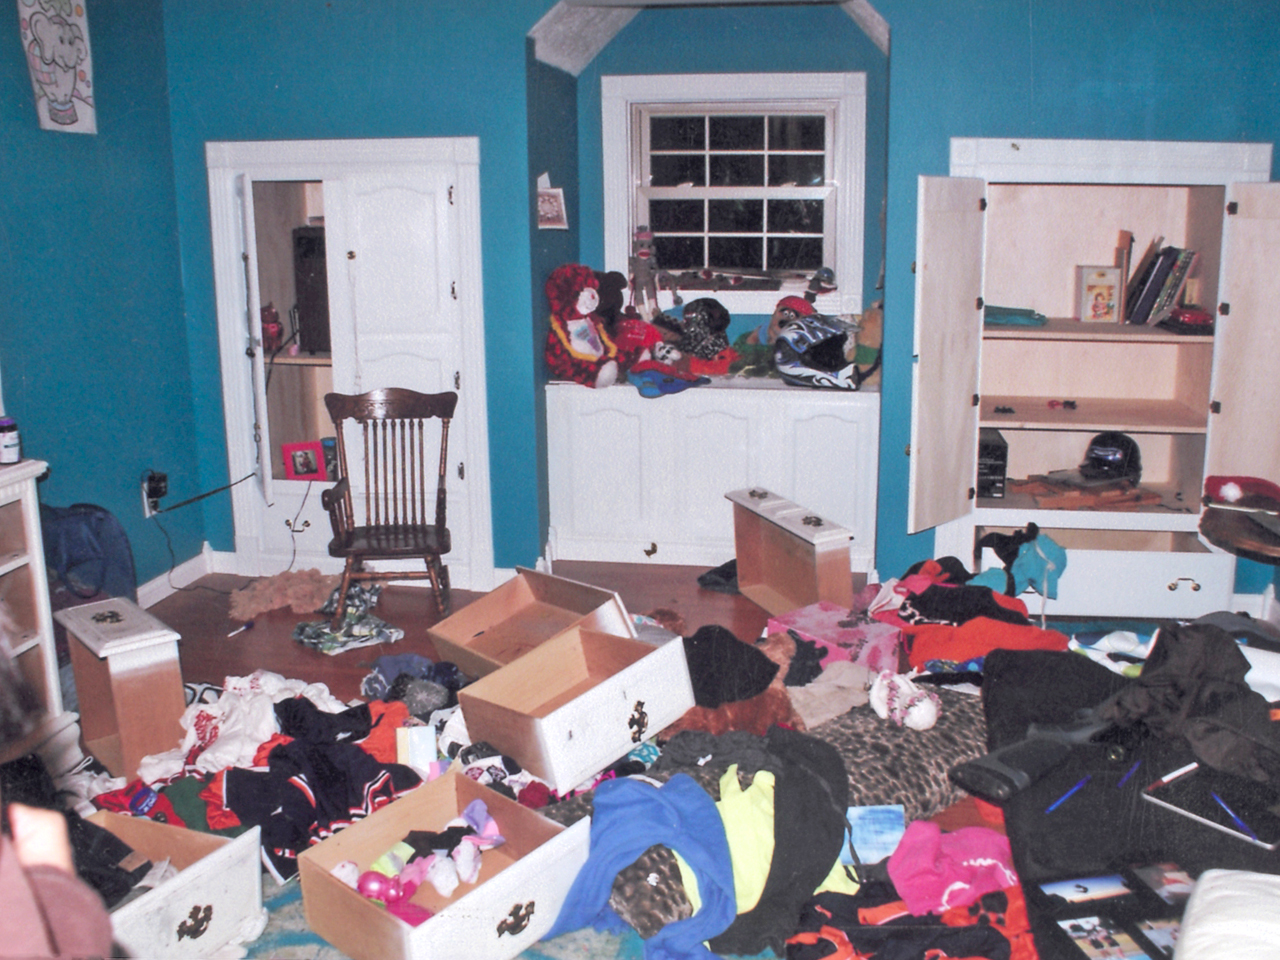 Thieves ransack homes of families attending funerals - TODAY.com1280 x 960